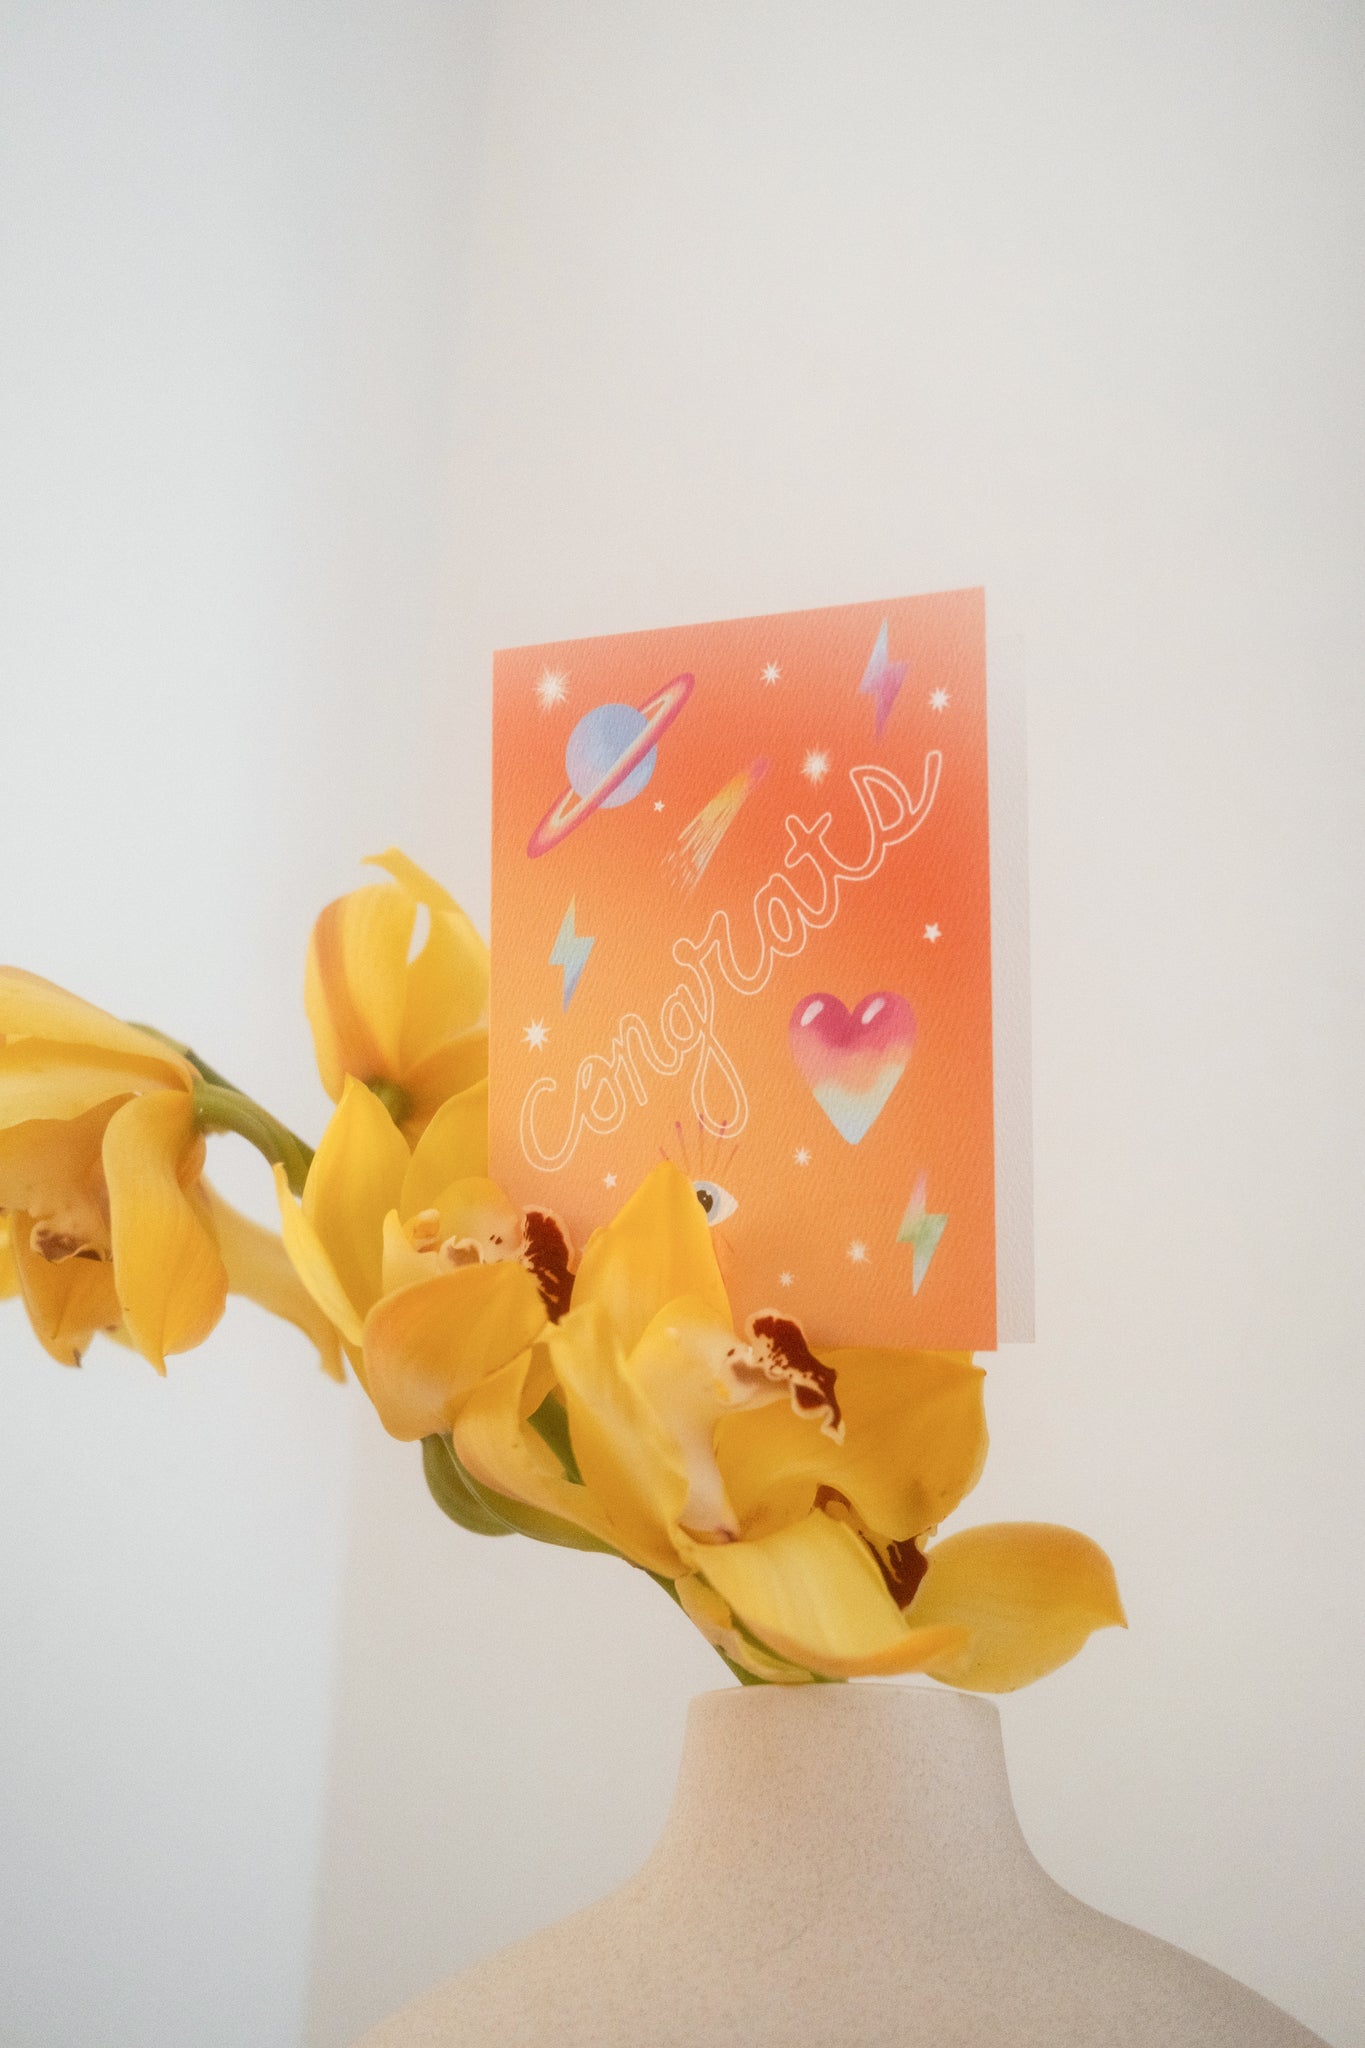 Greeting card with the word &quot;Congrats&quot; across the front in white hollow font with neon icons against an ombre orange background. Shown sitting on yellow orchids in a clay pot against an off white background.